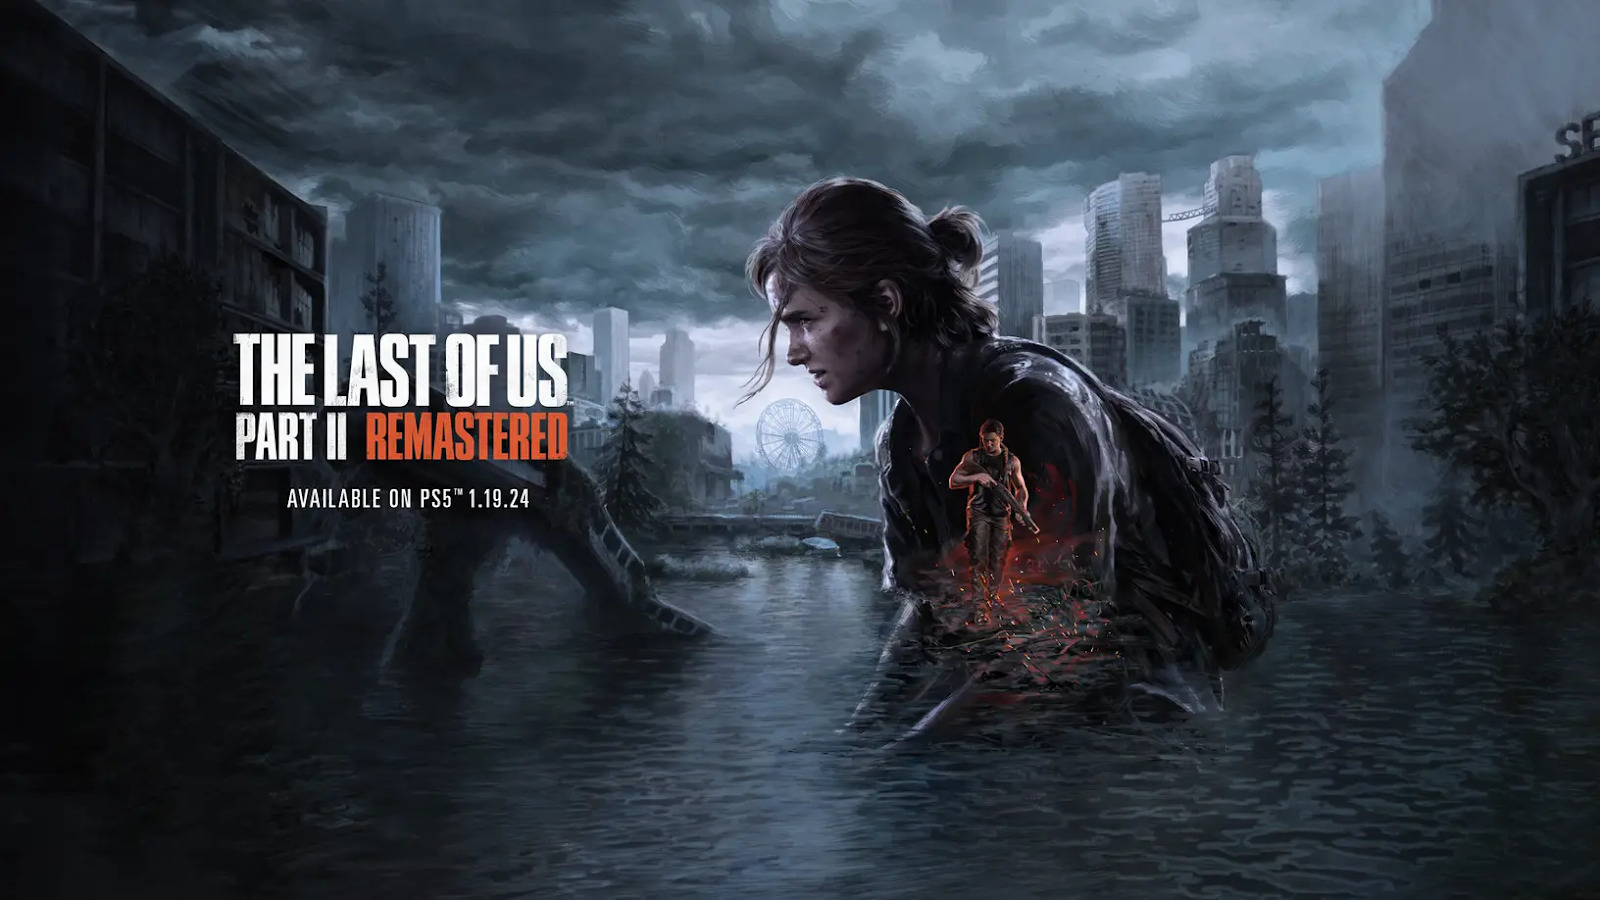 The last of us 2 